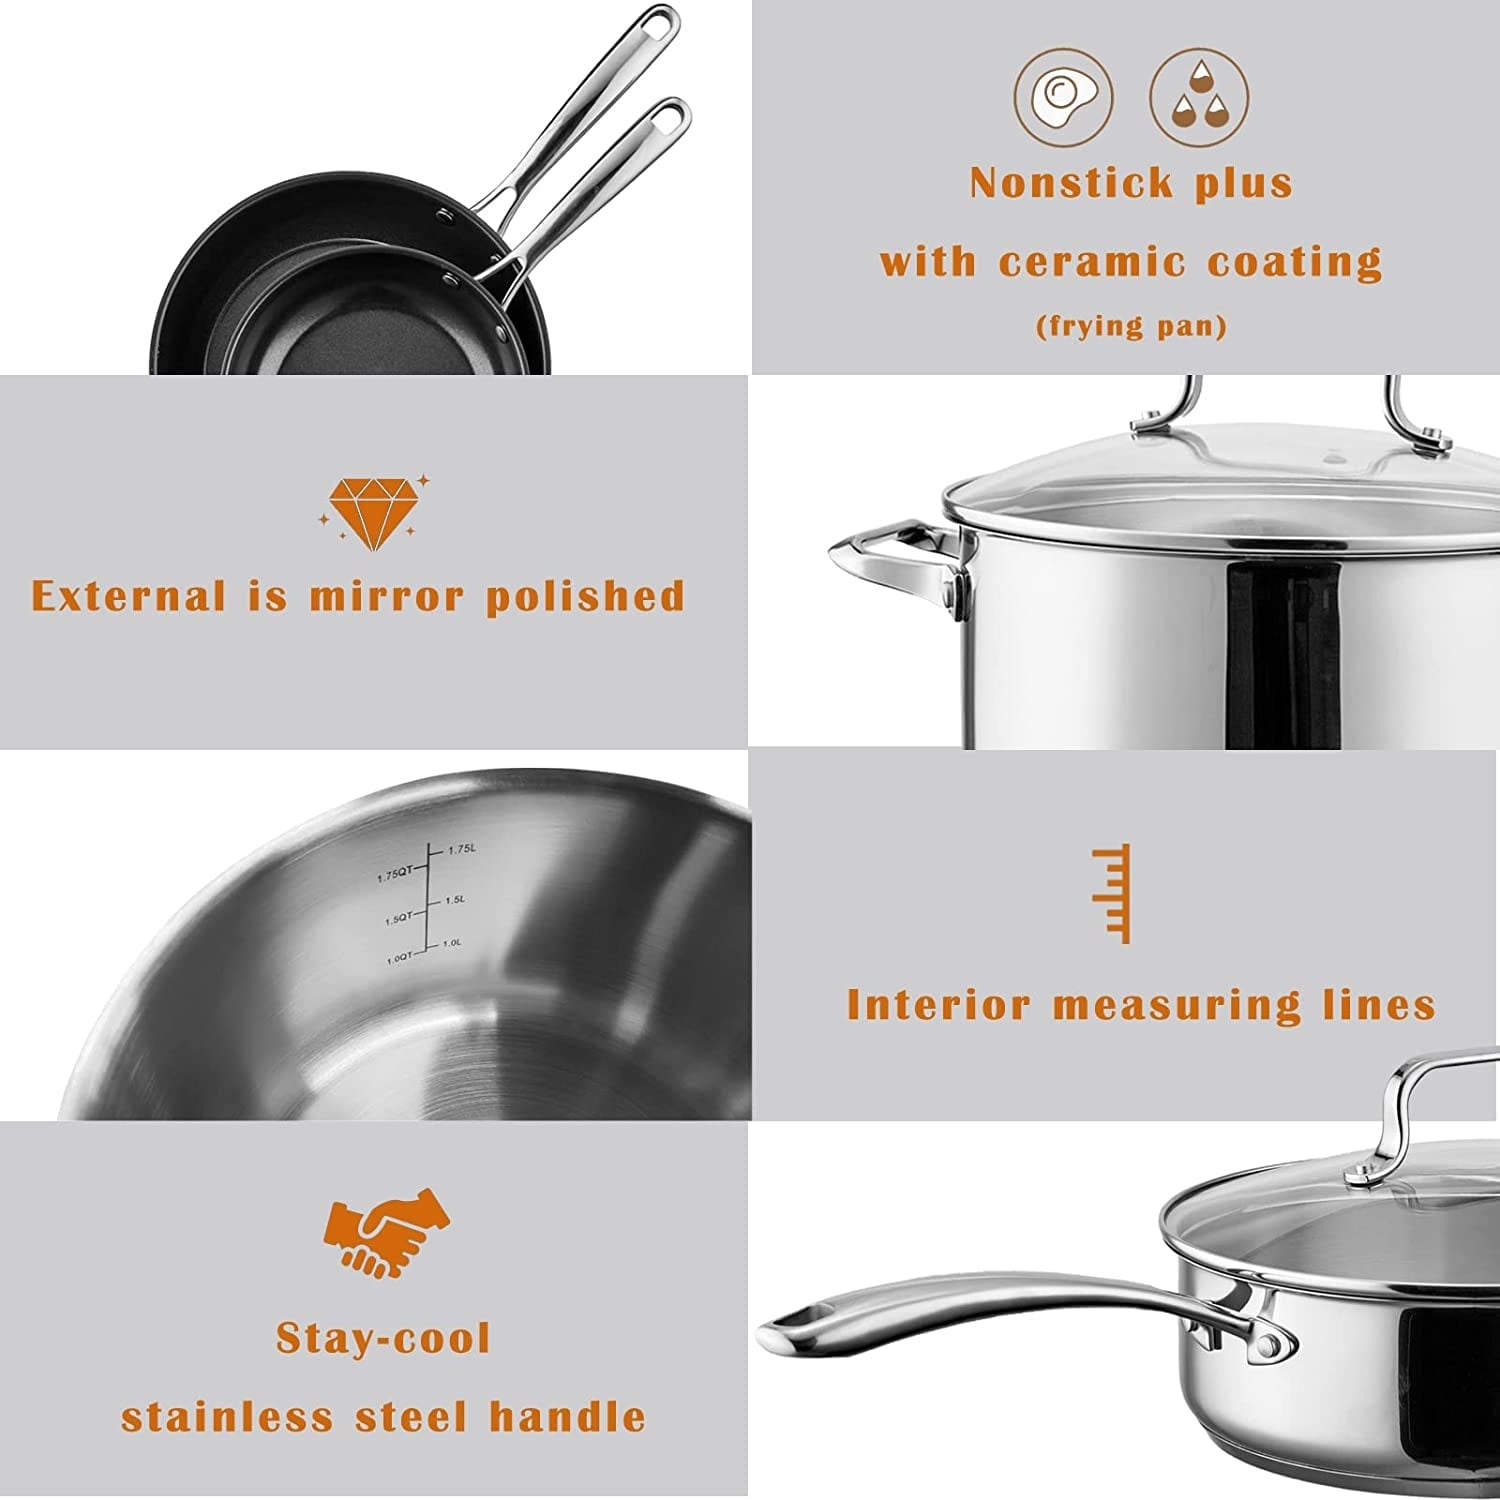 Stainless Steel Pots and Pans Set Ceramic Nonstick, 10 Pieces Professional  Home Chef Kitchen Cookware Set with Stay-Cool Handles, Mirror Polished,  Oven Dishwasher Safe, Non Toxic Non Teflon 